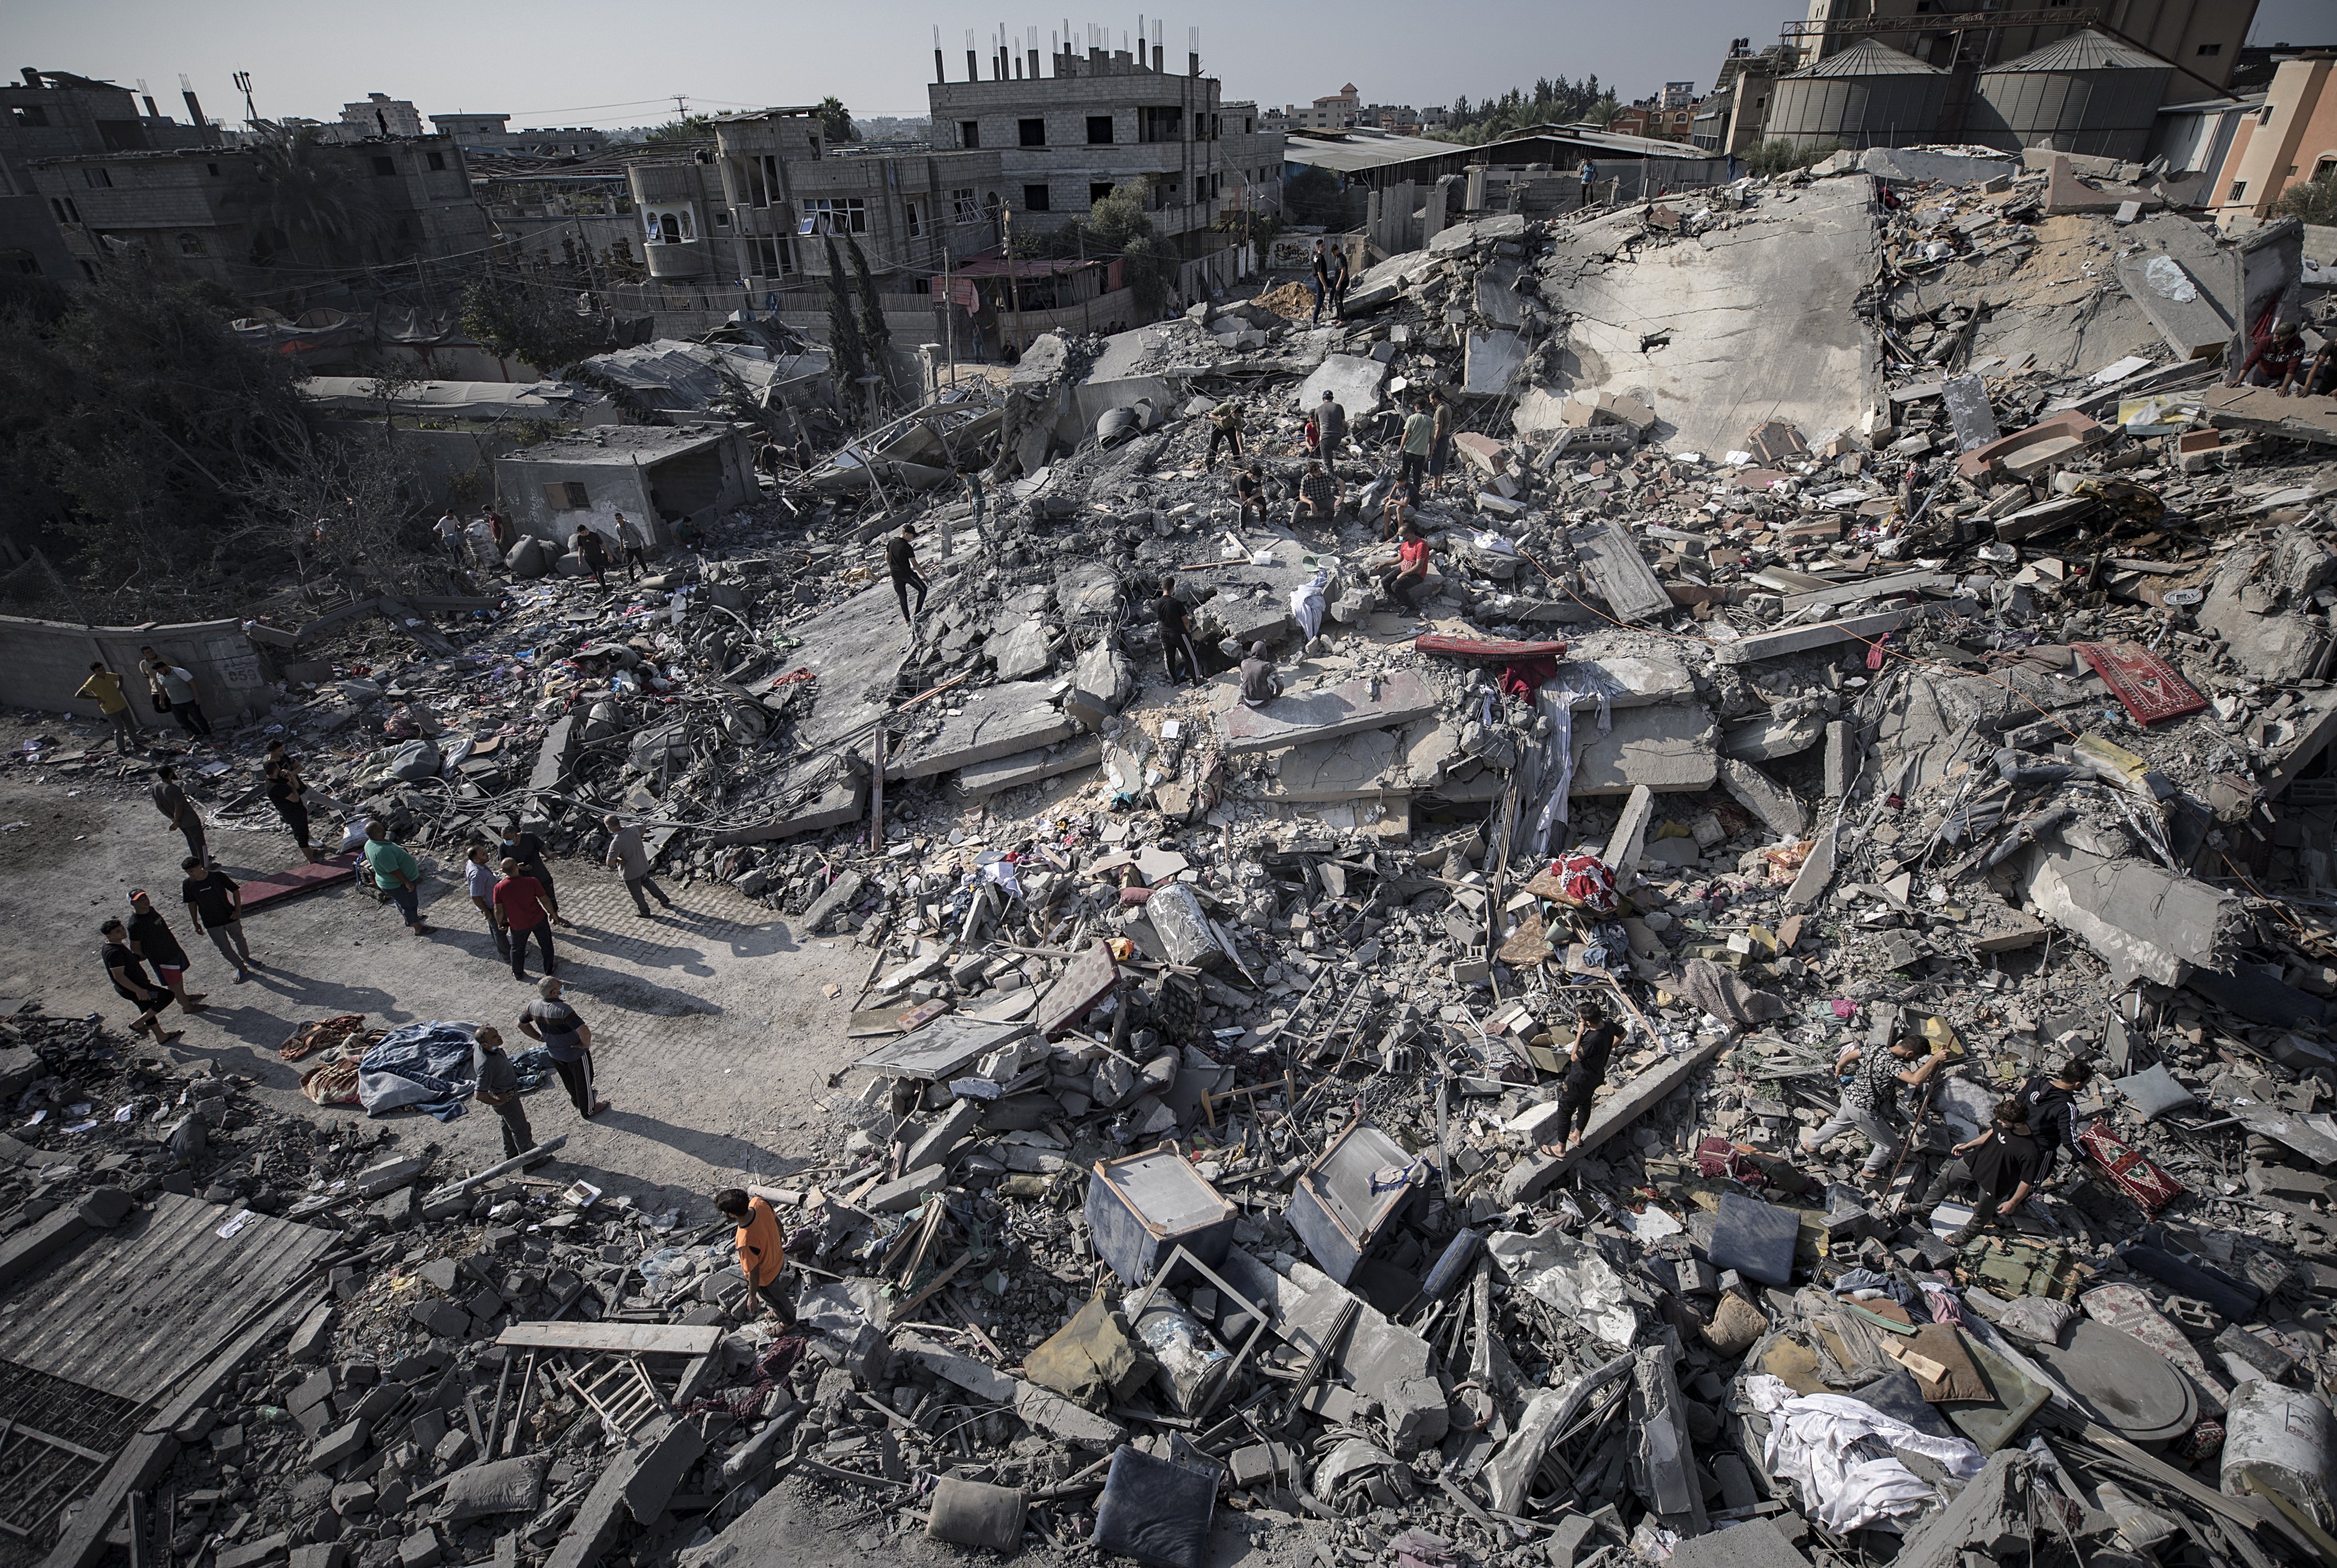 Palestinians search for bodies and survivors following an Israeli airstrike in Gaza on Wednesday. Photo: EPA-EFE